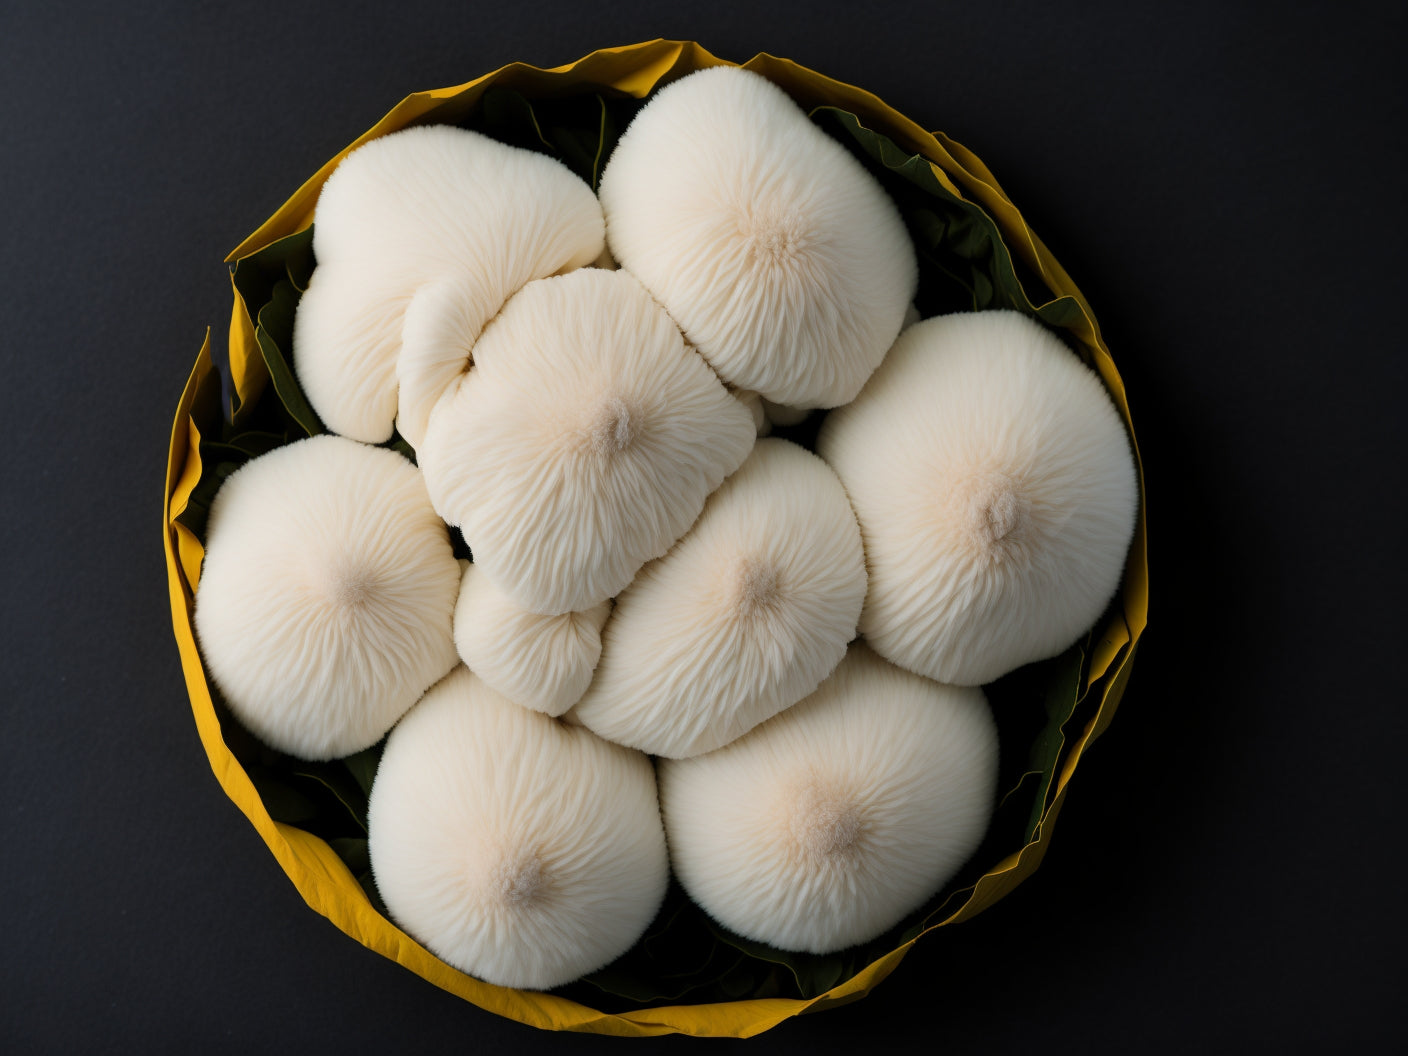 A close-up of a lion's mane mushroom in a bowl